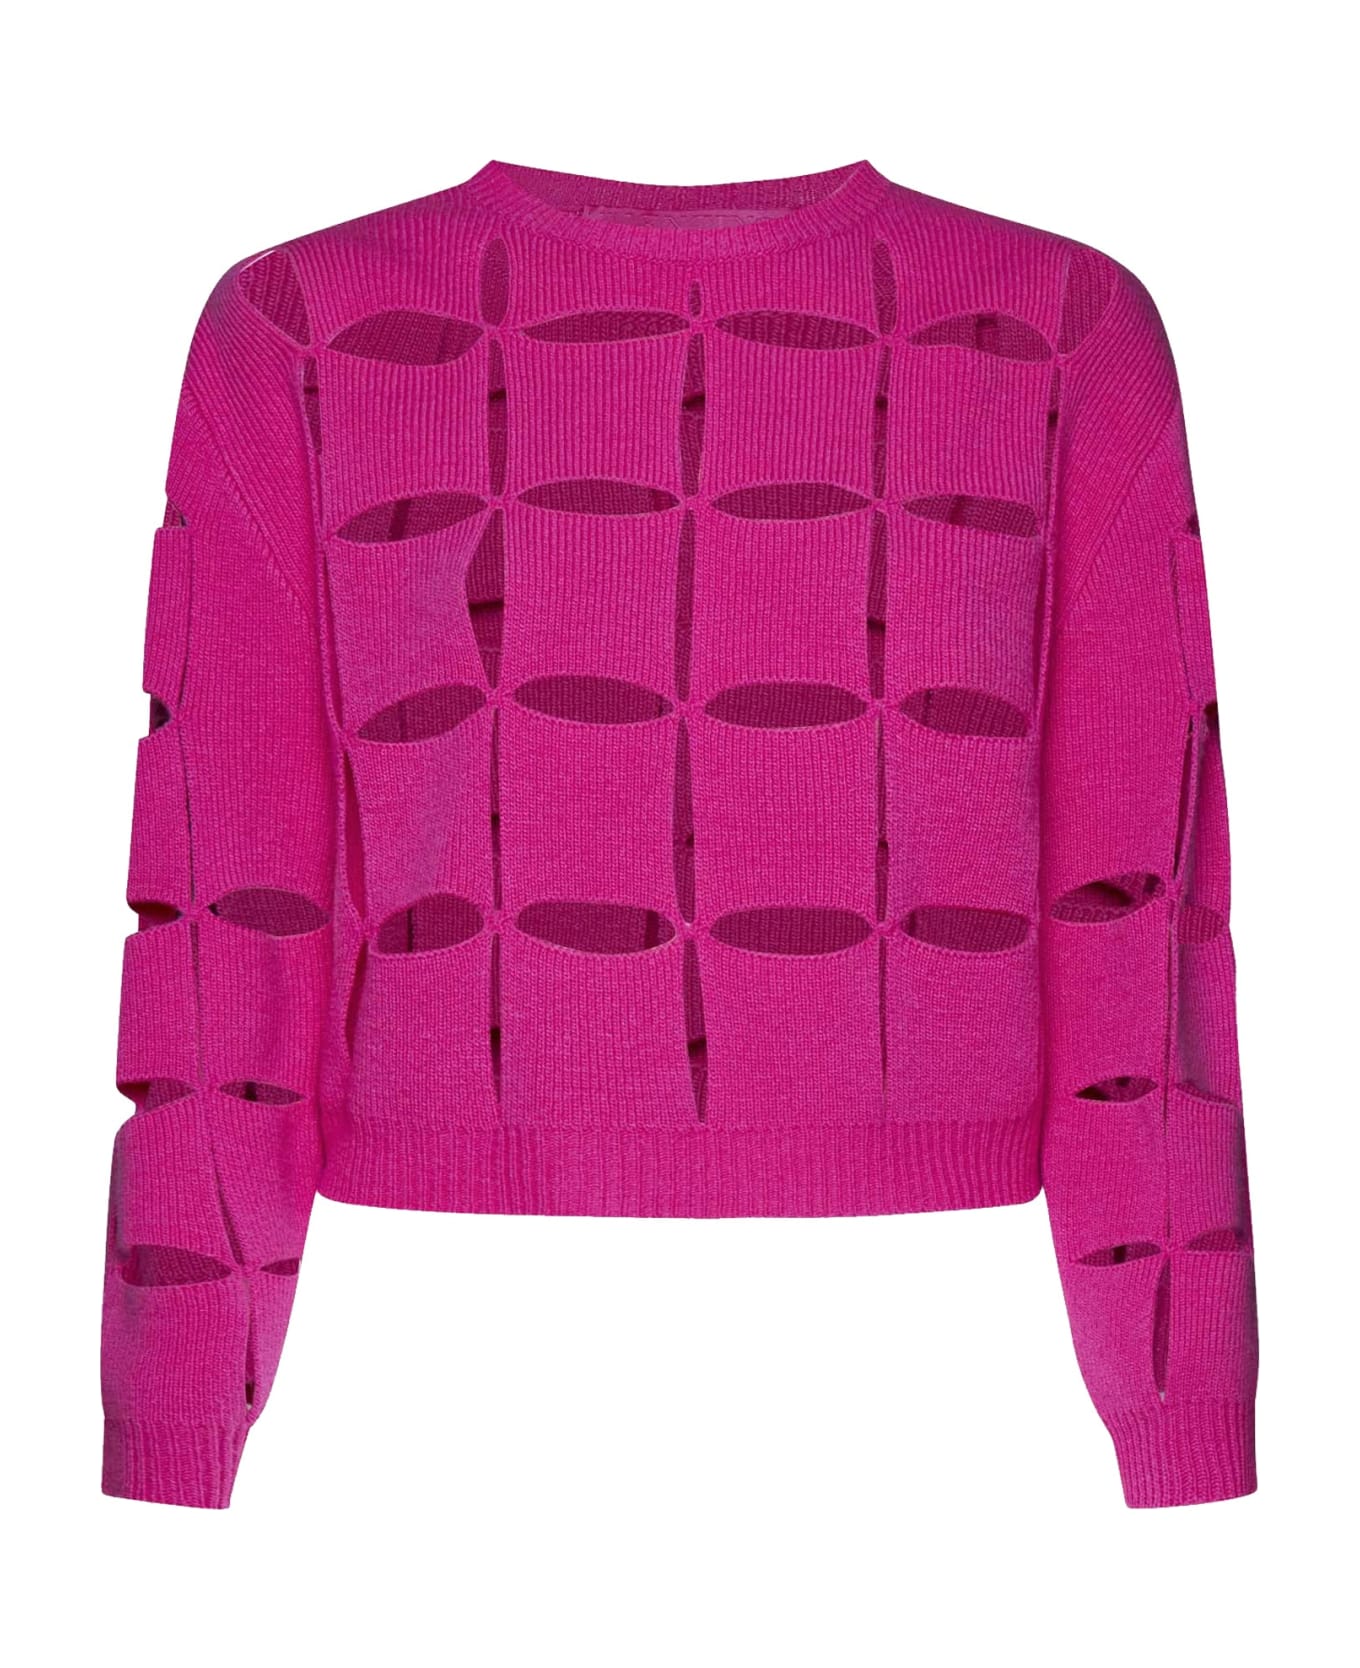 Valentino Cut-out Wool Sweater - Pink